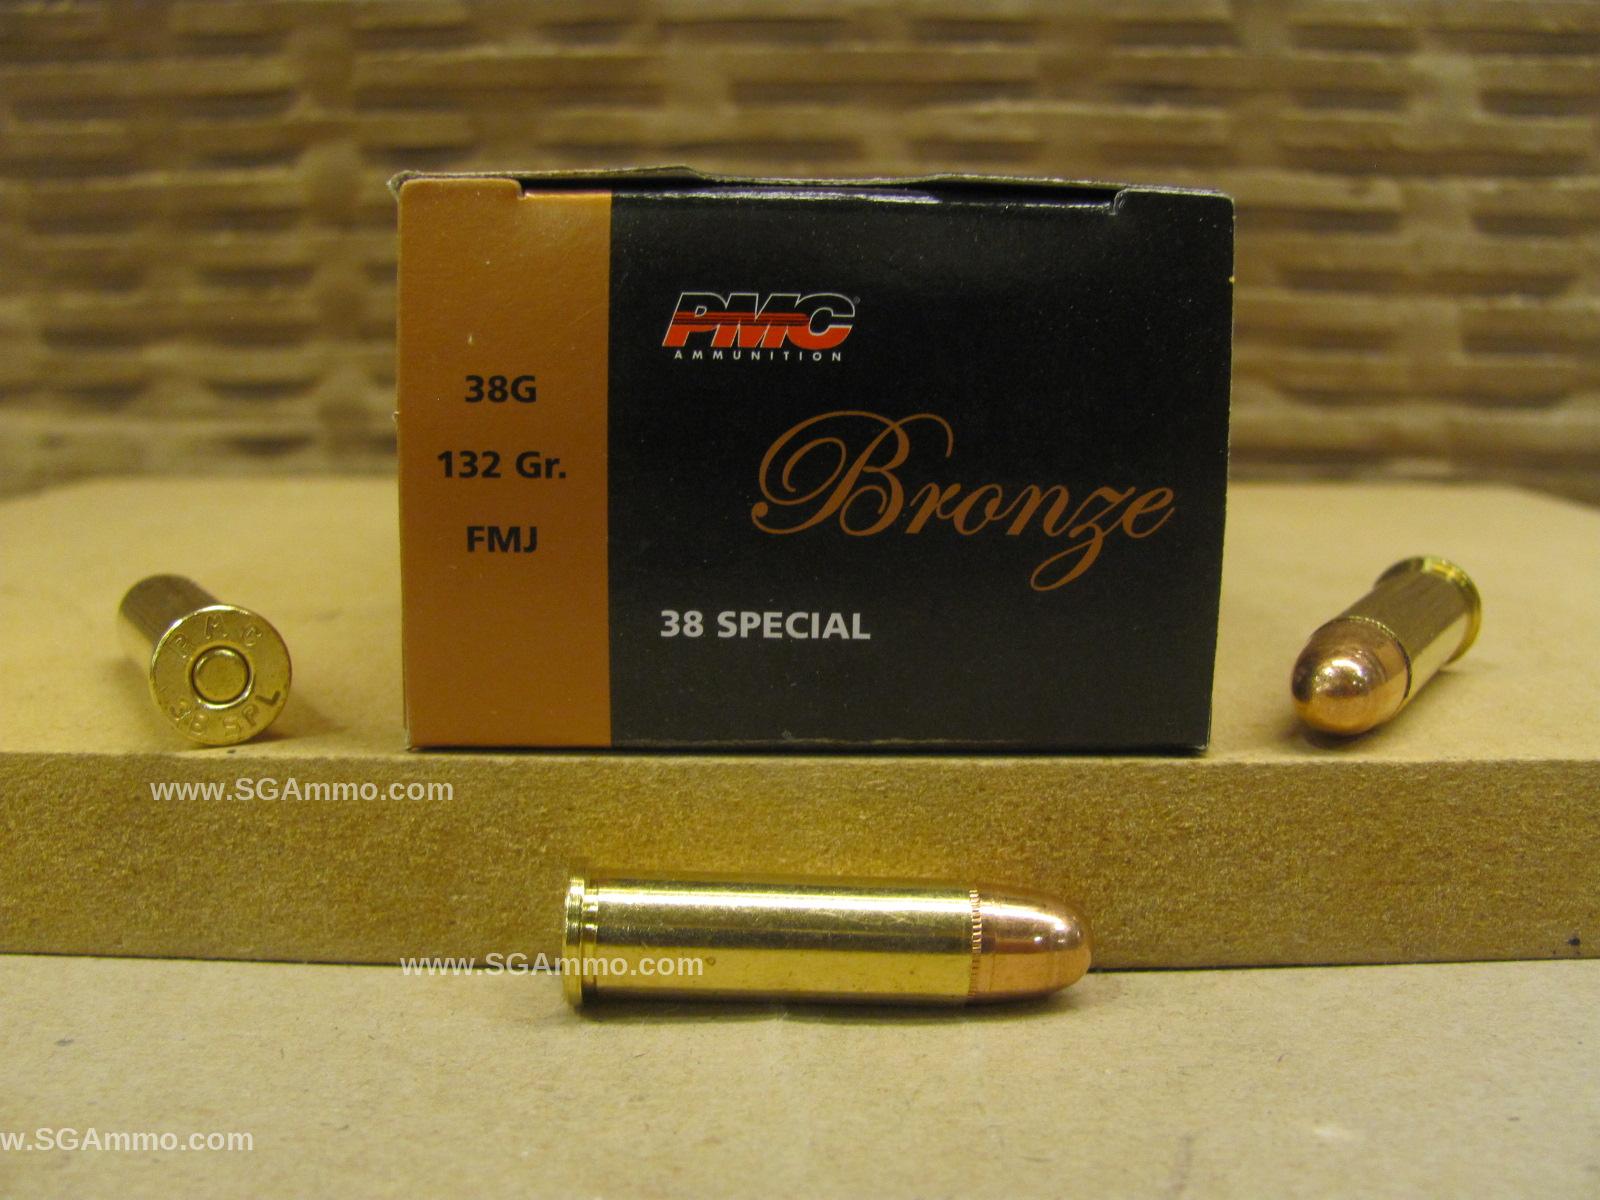 300 Round Battle Pack - 38 Special 132 Grain FMJ PMC Ammo - 38GBP ...